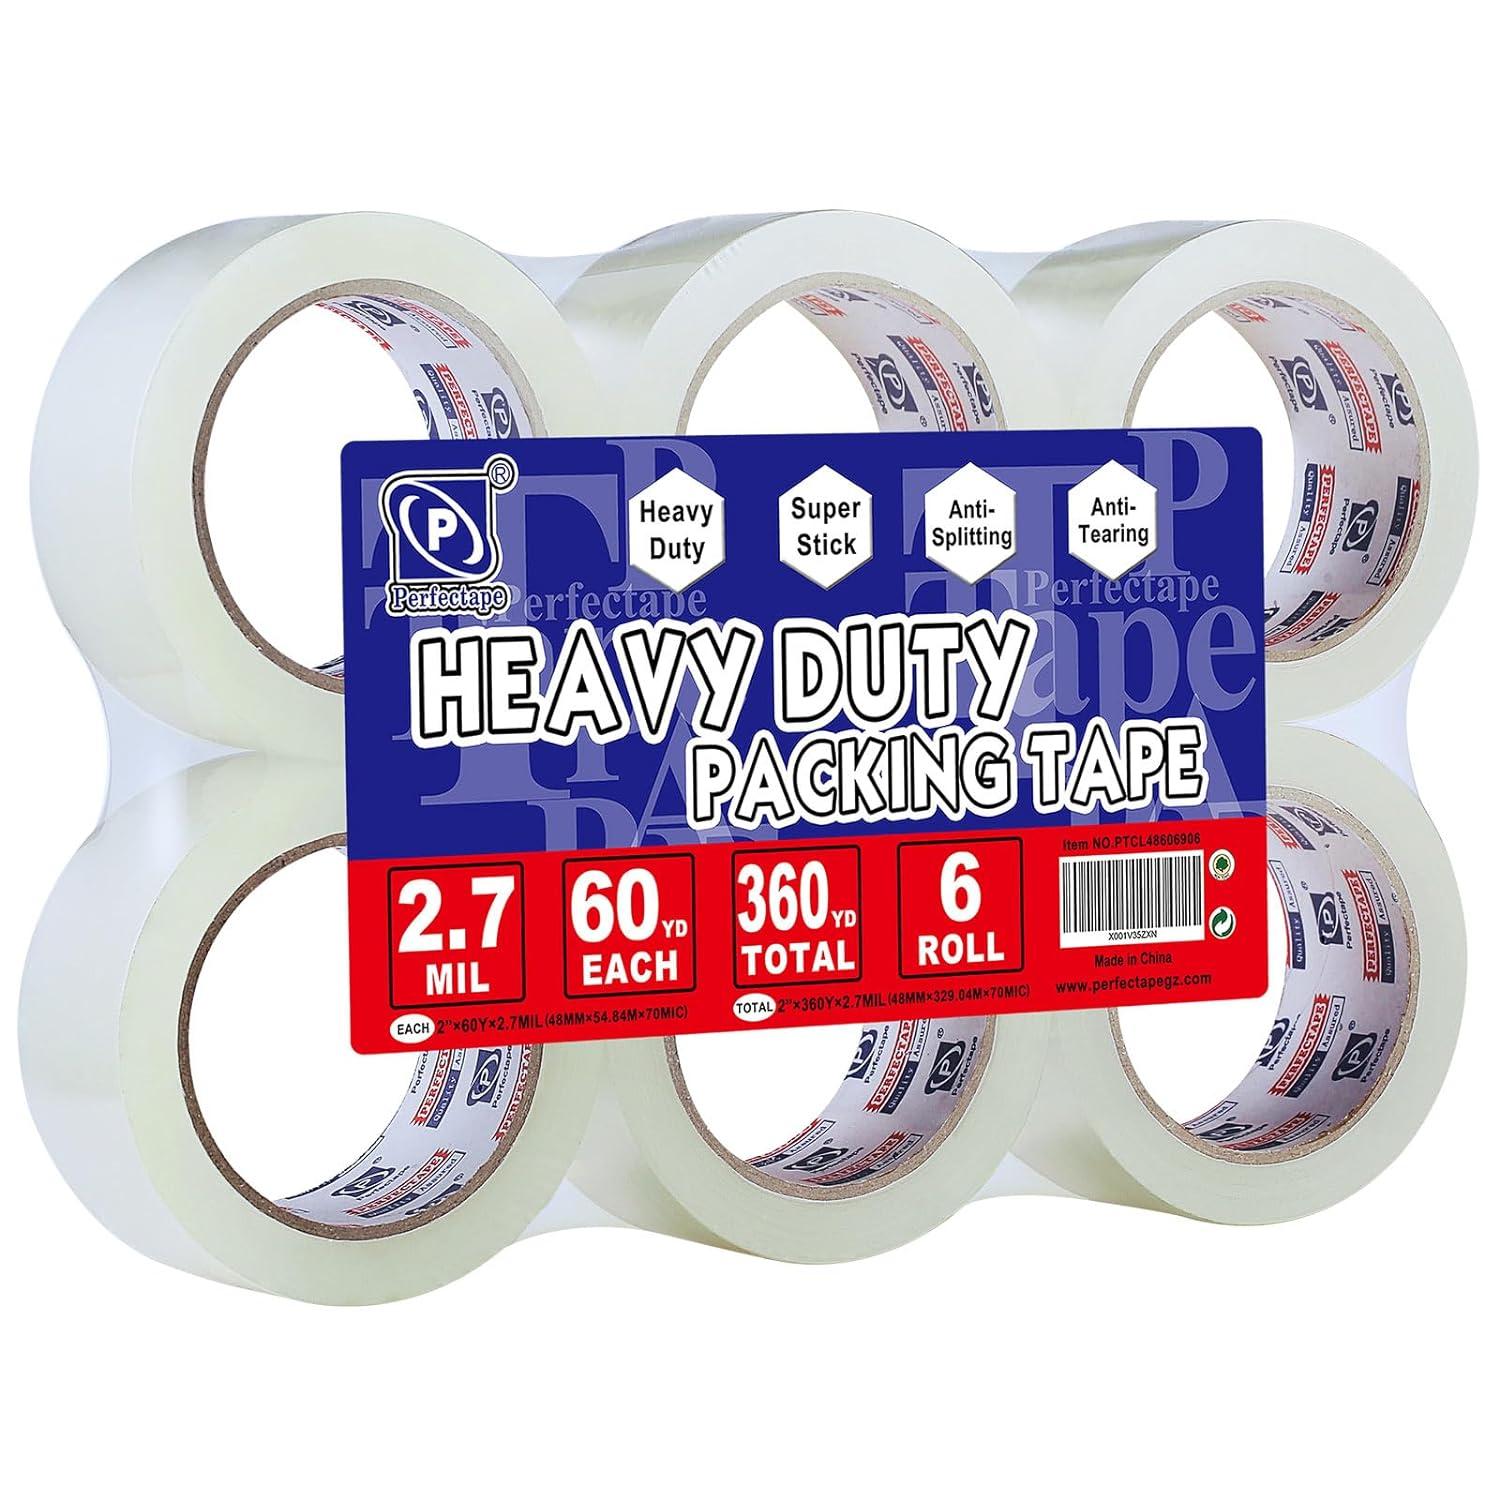 perfectape heavy duty packing tape 6 rolls total 360y clear 2 7 mil 1 88 inch x 60 yards ultra strong refill